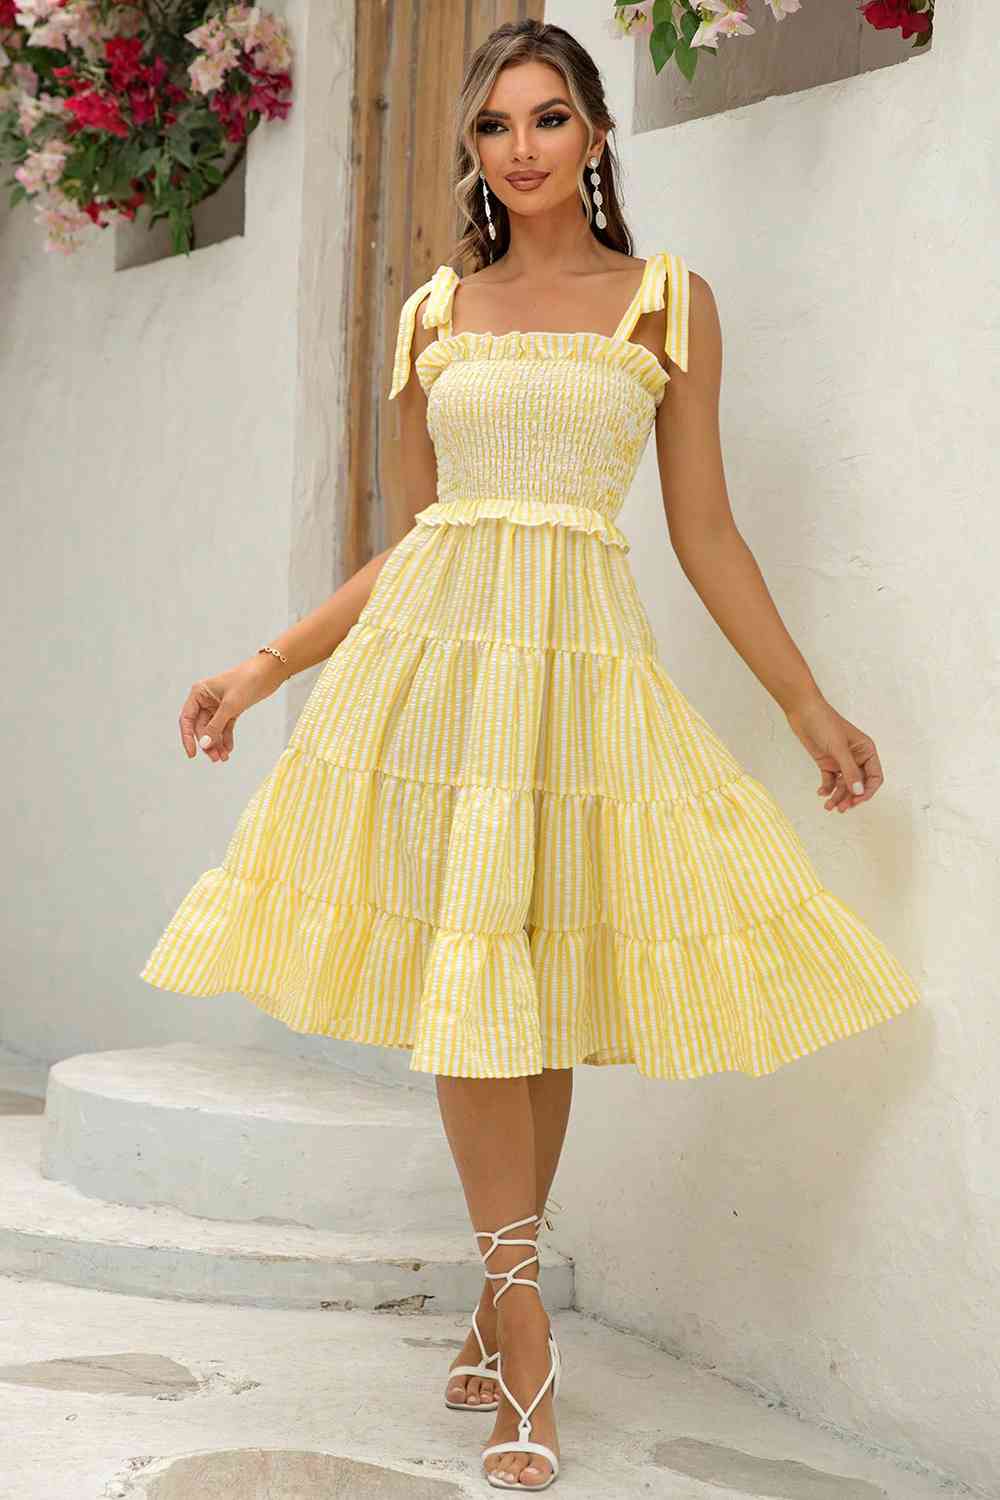 Striped Tie-Shoulder Tiered Dress - Banana Yellow / XS - All Dresses - Dresses - 1 - 2024